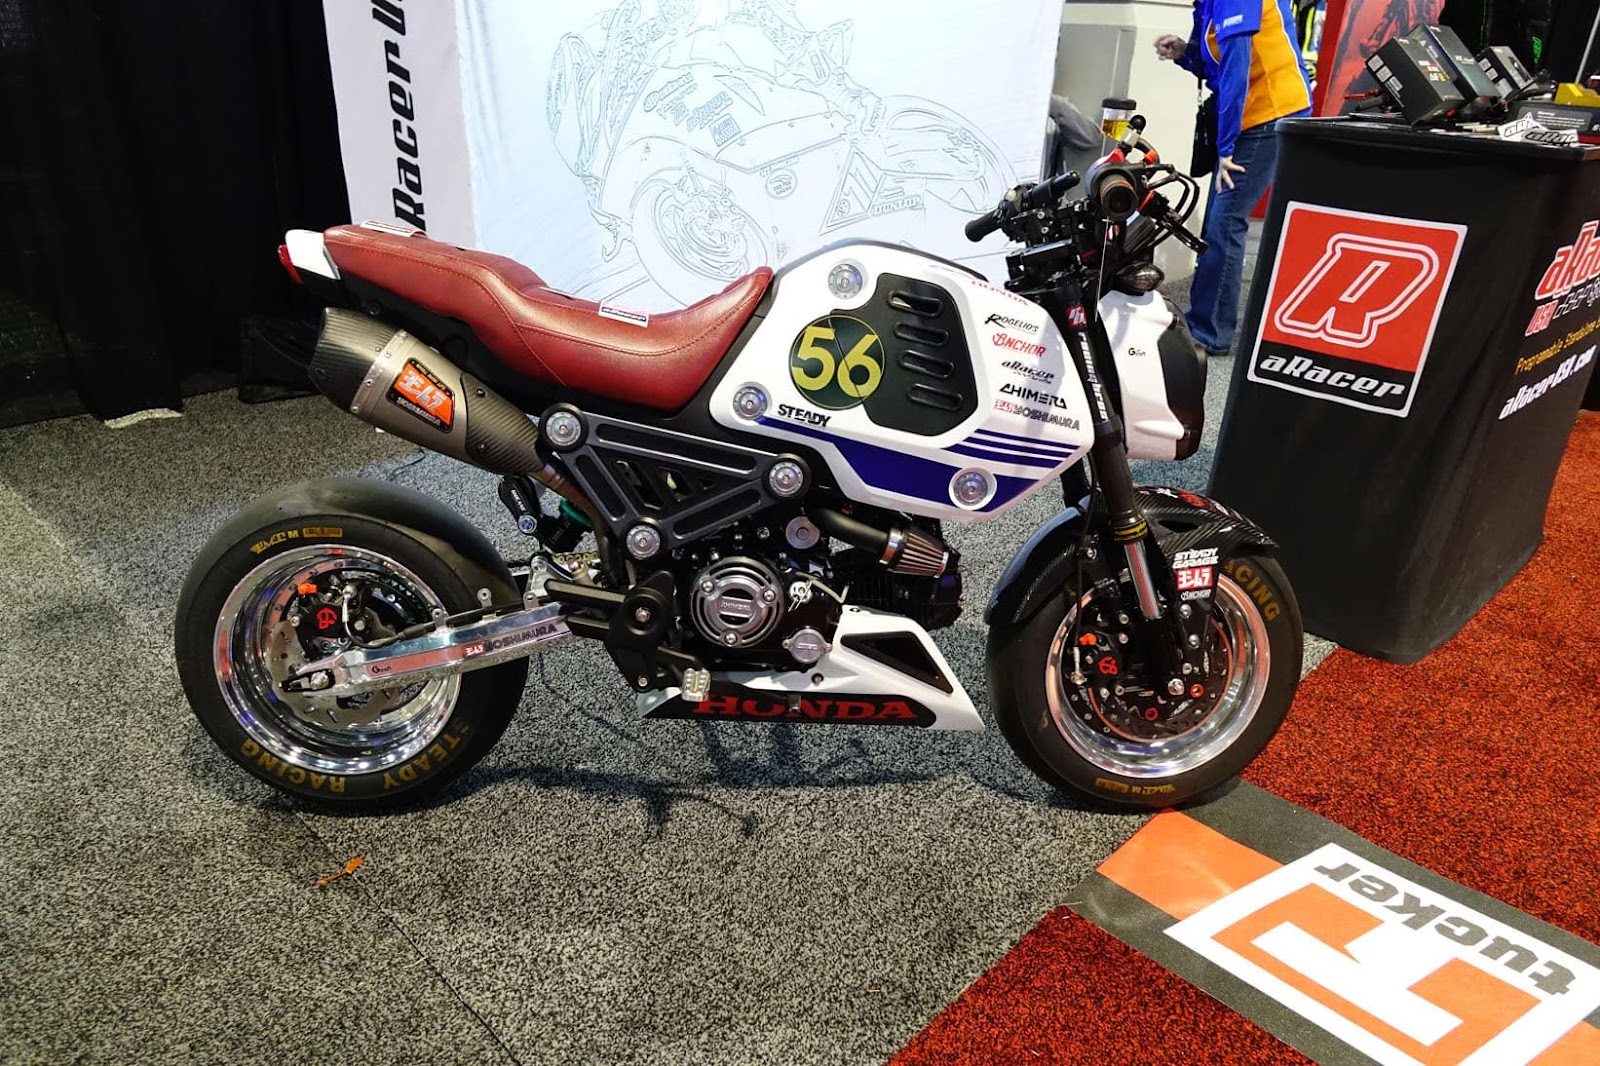 Vintage Honda motorcycle steals the show at AIMExpo, the ultimate powersports trade event